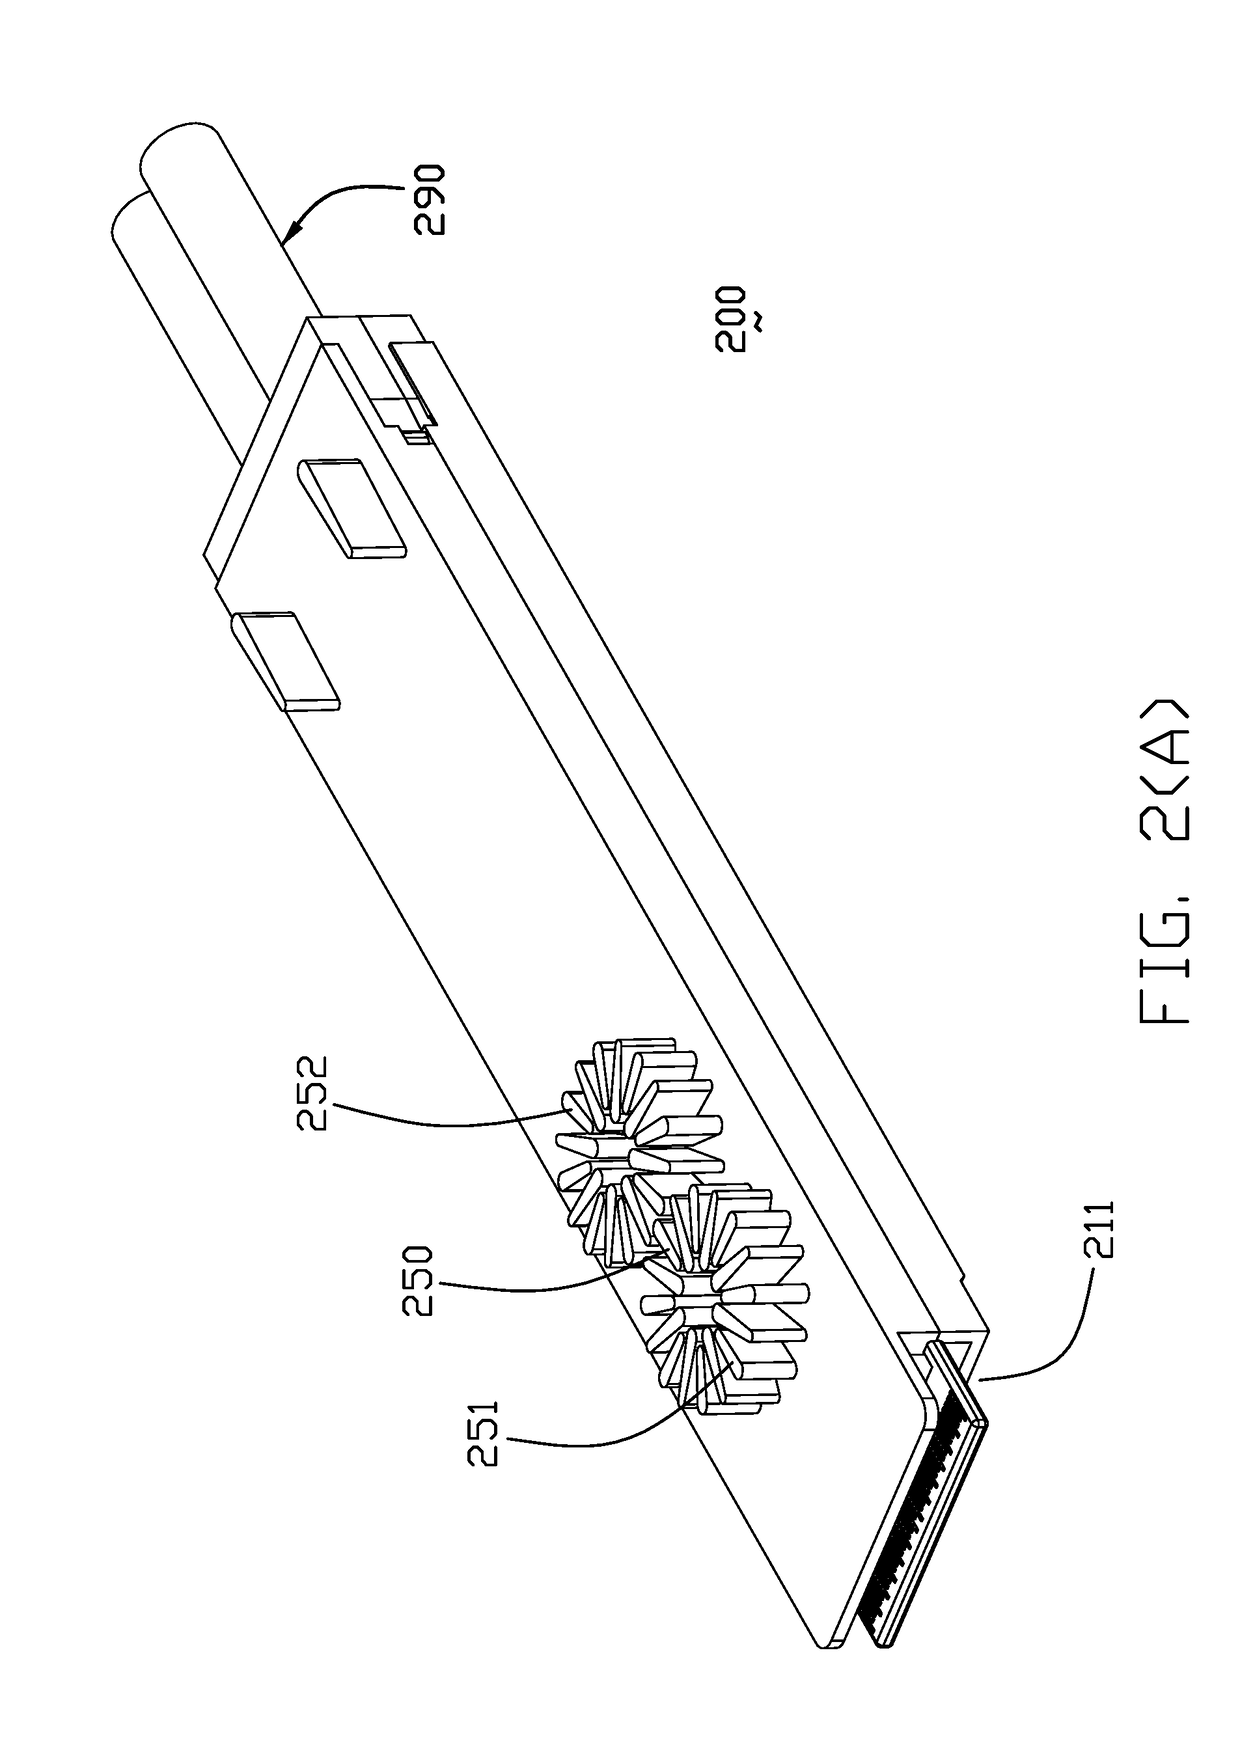 Plug connecetor with a metallic enclosure having heat sink member thereon